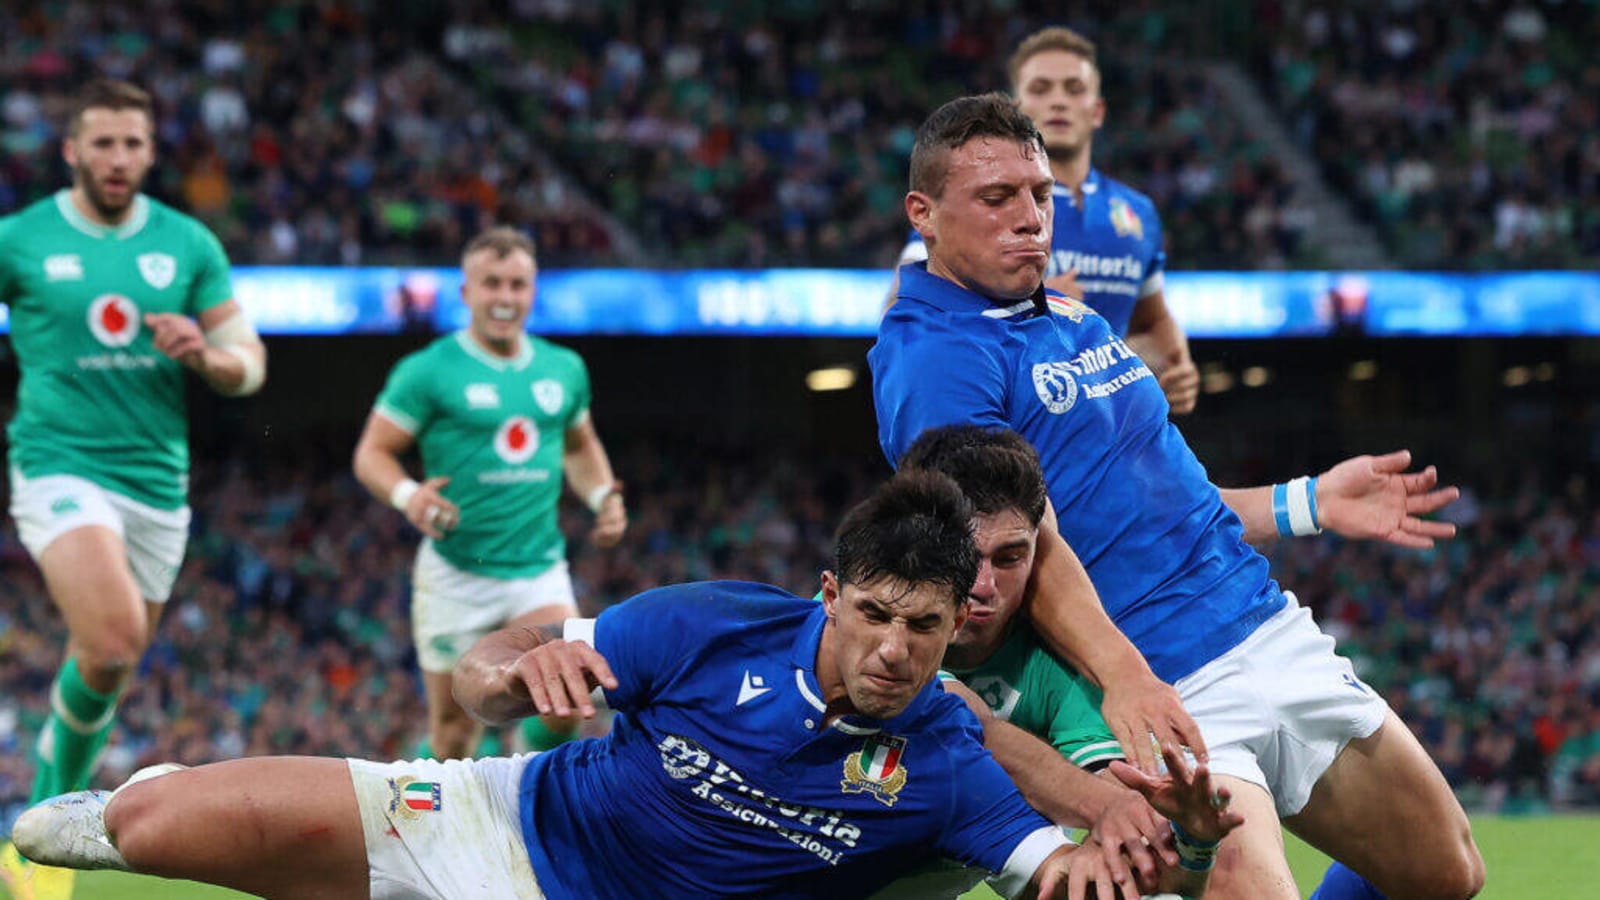 Watch Italy vs Namibia for free in the US 2023 Rugby World Cup online live stream, TV channel, and start time Yardbarker